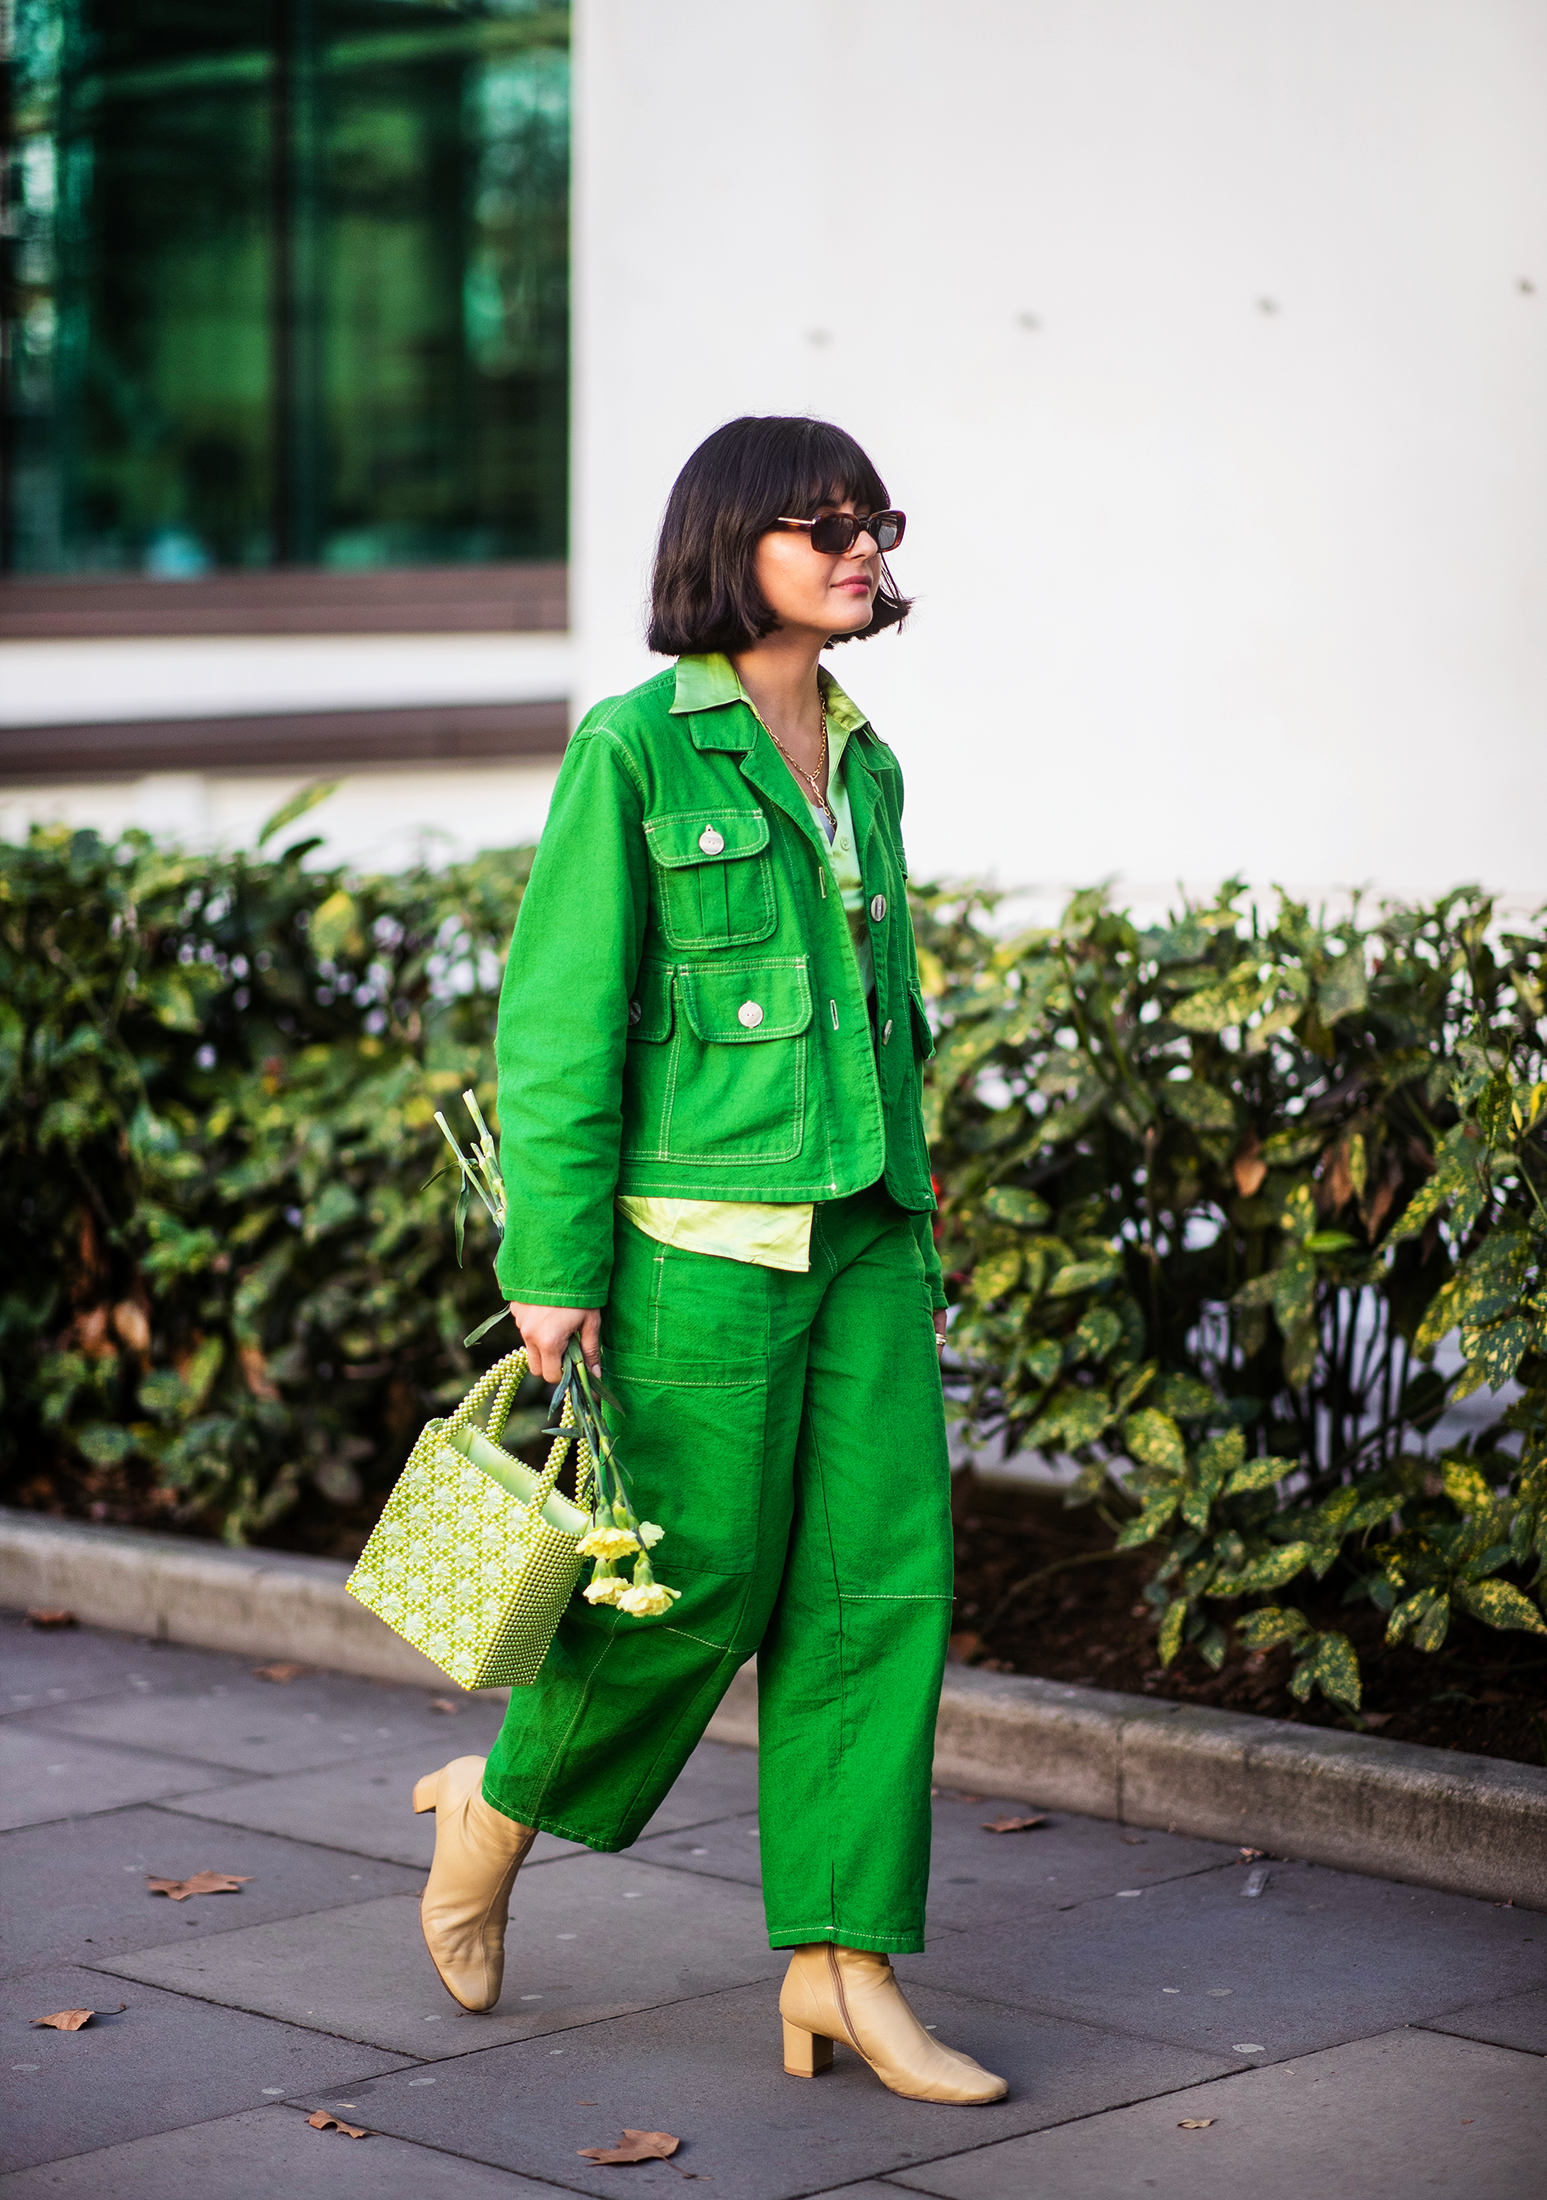 Fall Business Smart Green Monochrome Outfit - Brunette from Wall Street